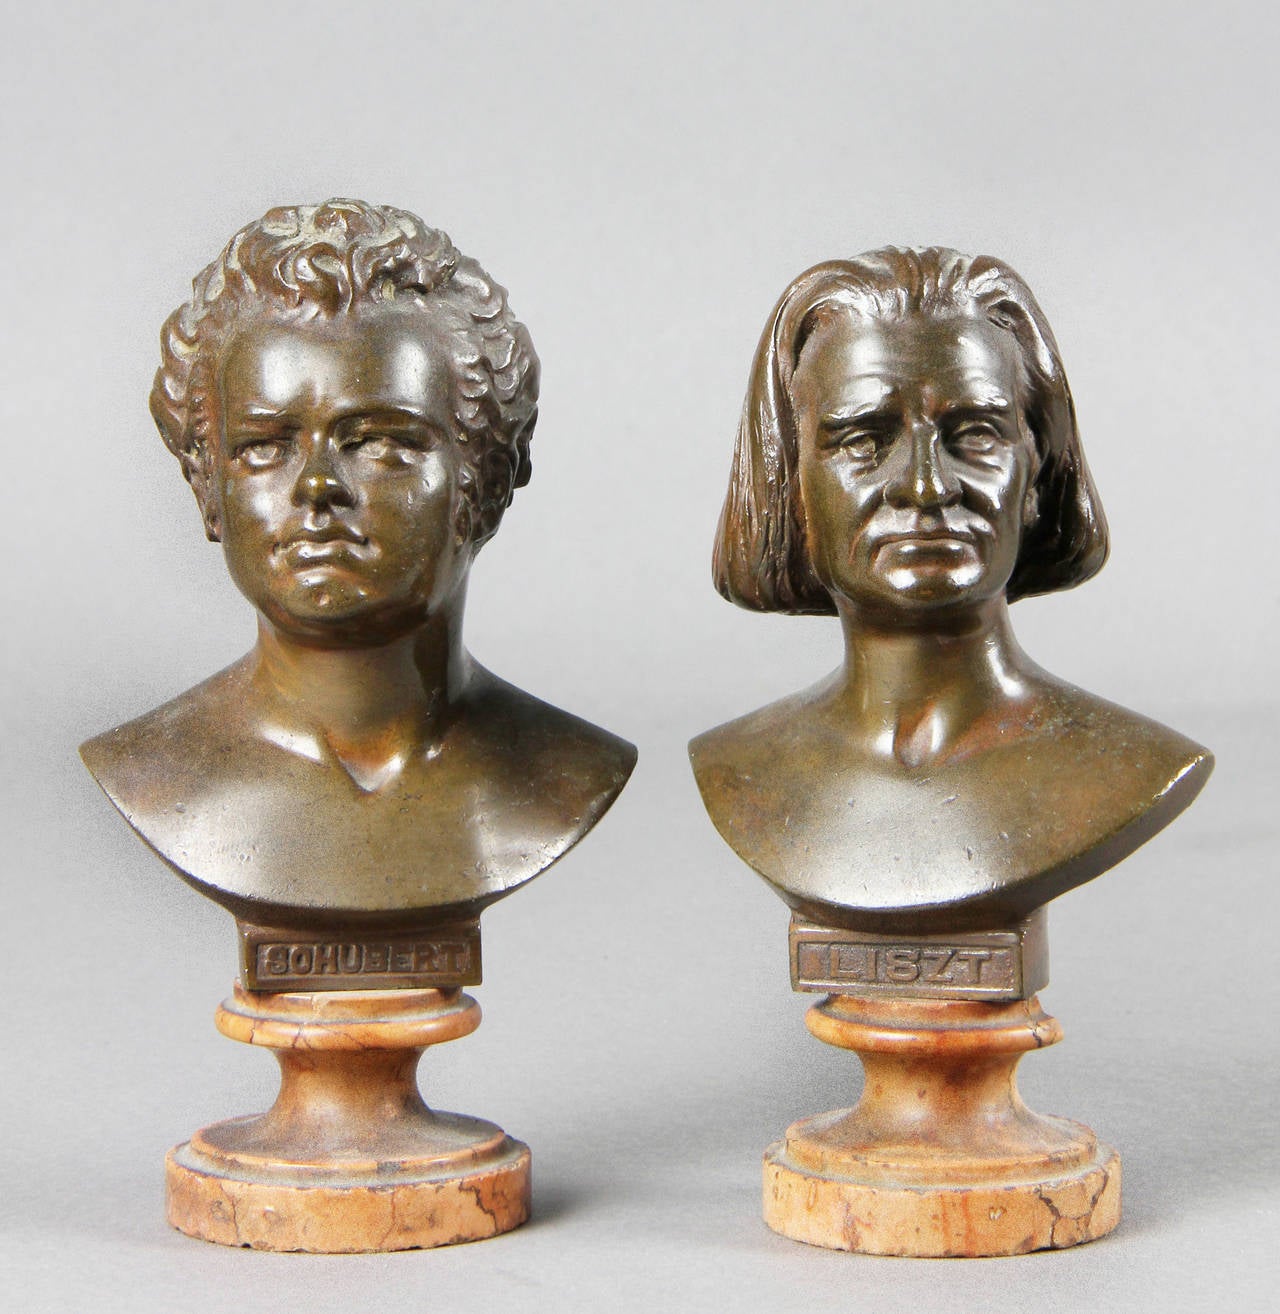 The largest four with Rosso Antico bases depicting Mozart, Haydn, Gluck and Beethoven , another medium size of Listz, then five with pink travertine bases of Gounod, Verdi, Liszt, Haendel, Schubert. Three bases with chips.